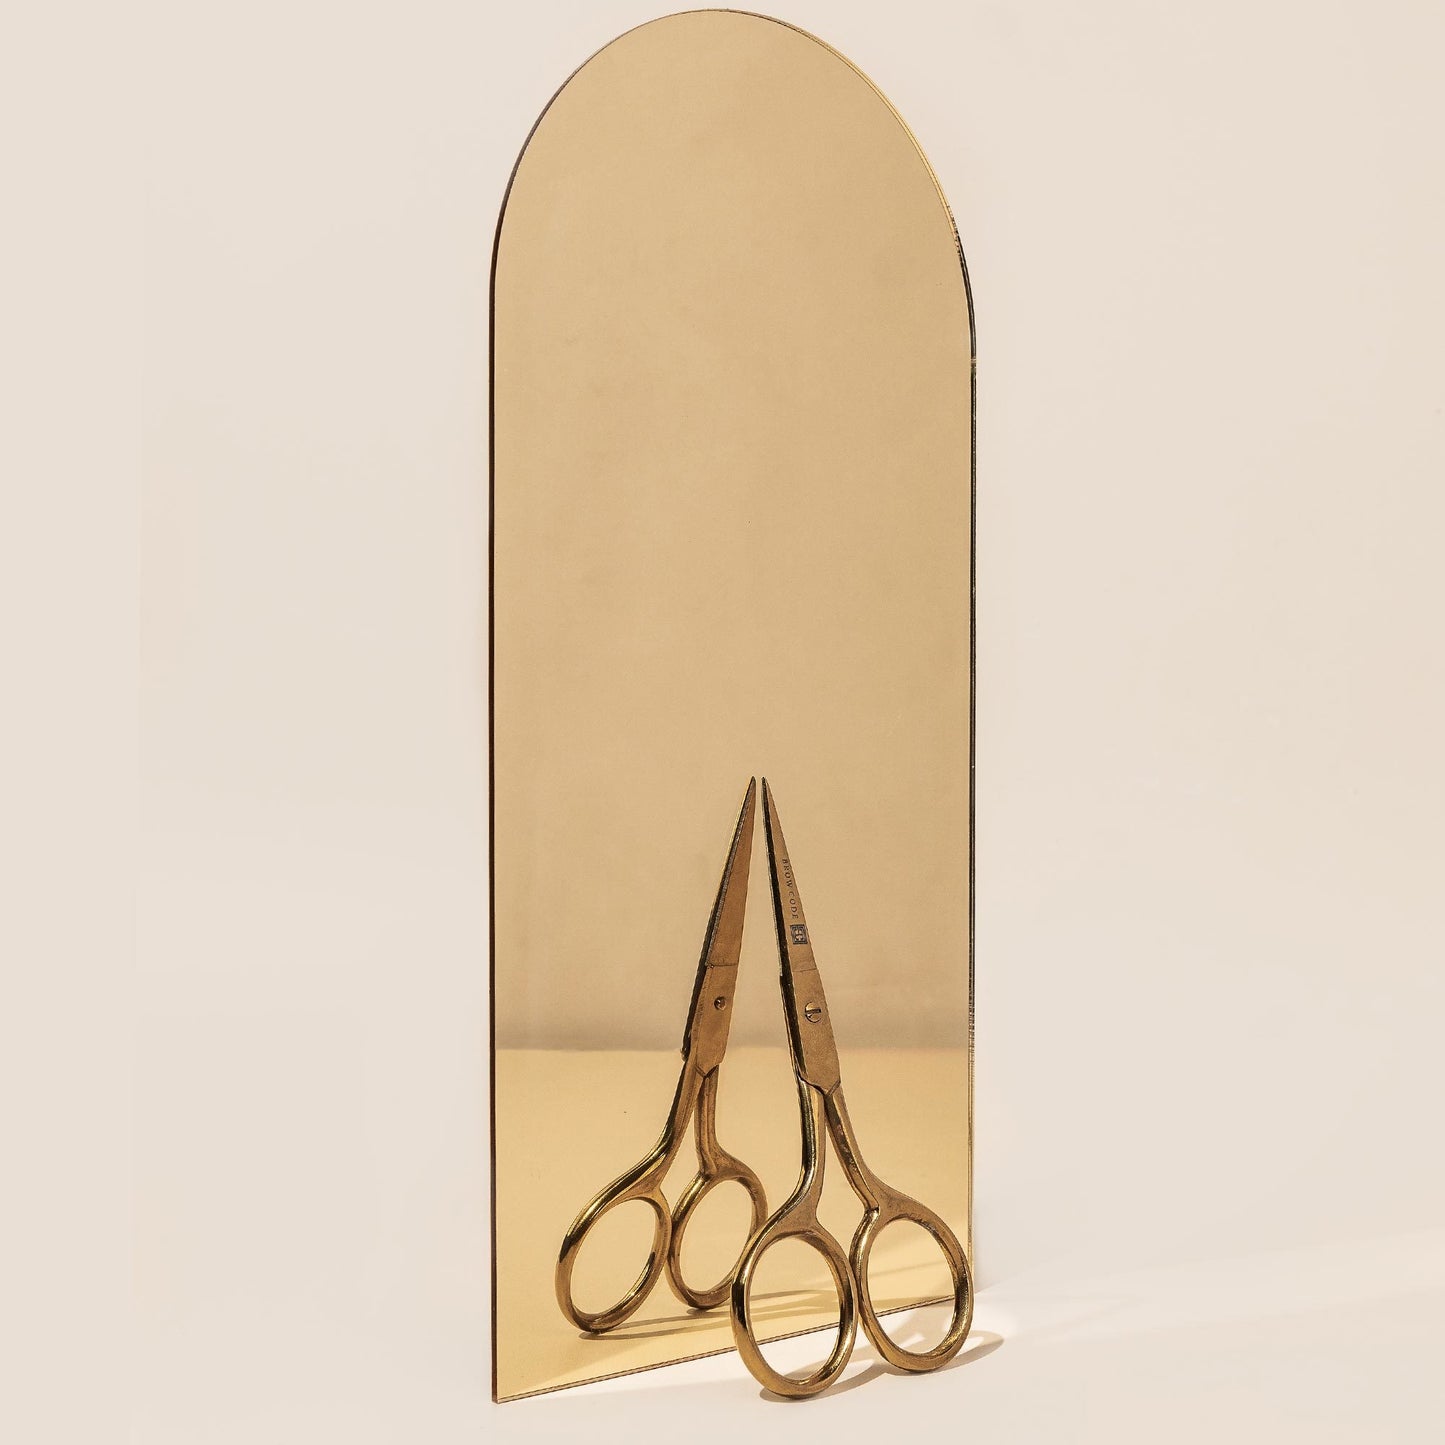 Stylised photo of trimming scissors up against a mirror